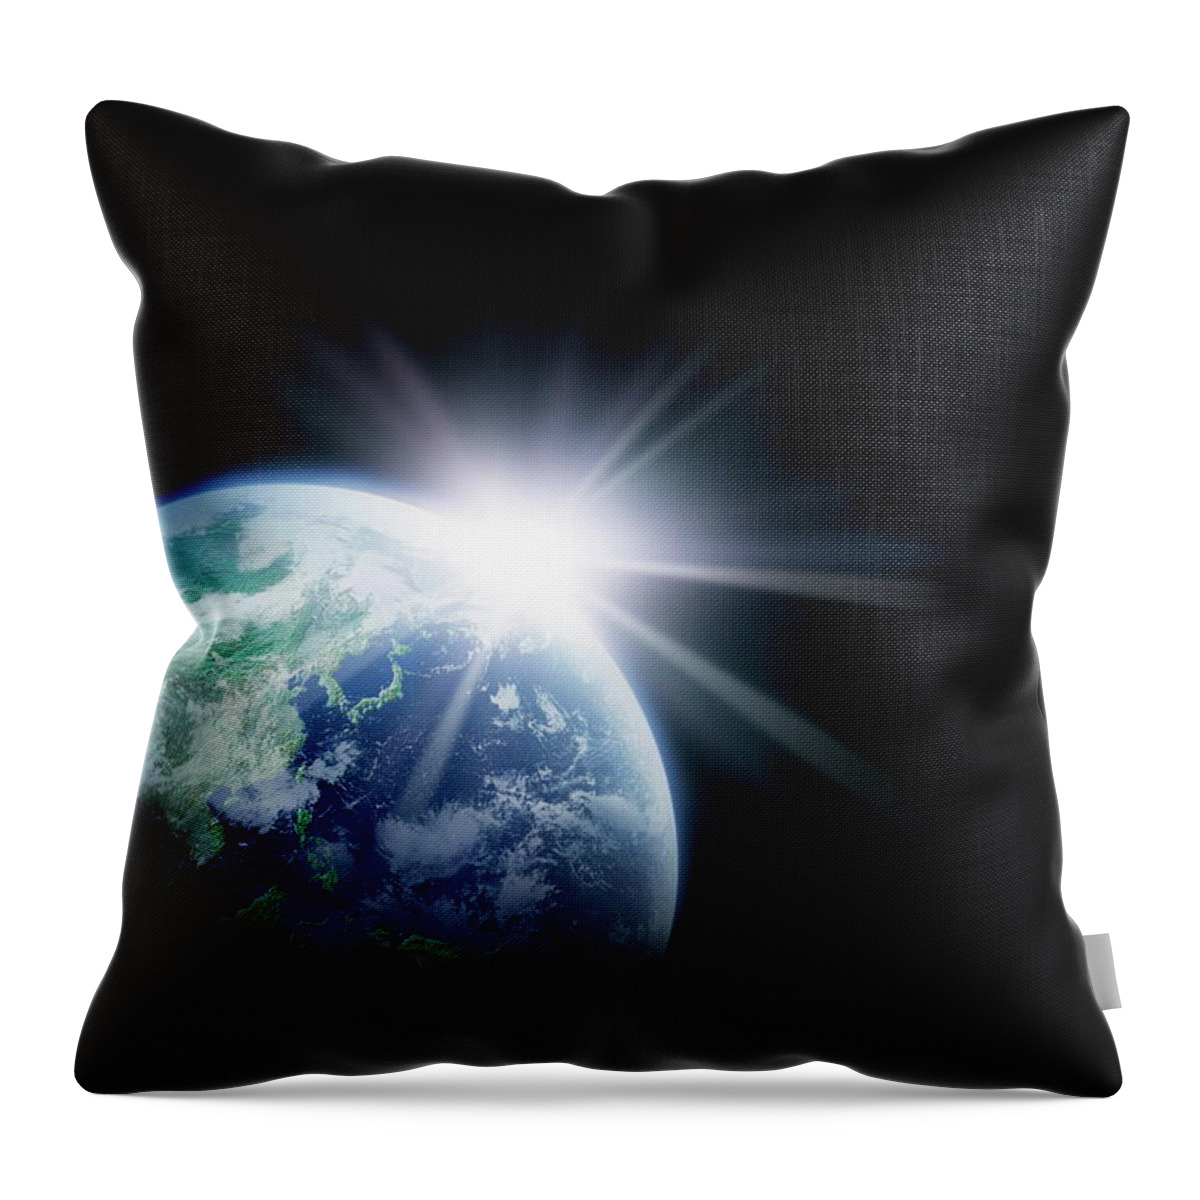 Globe Throw Pillow featuring the photograph Sunlight Behind The Earth, Computer #1 by Vgl/amanaimagesrf